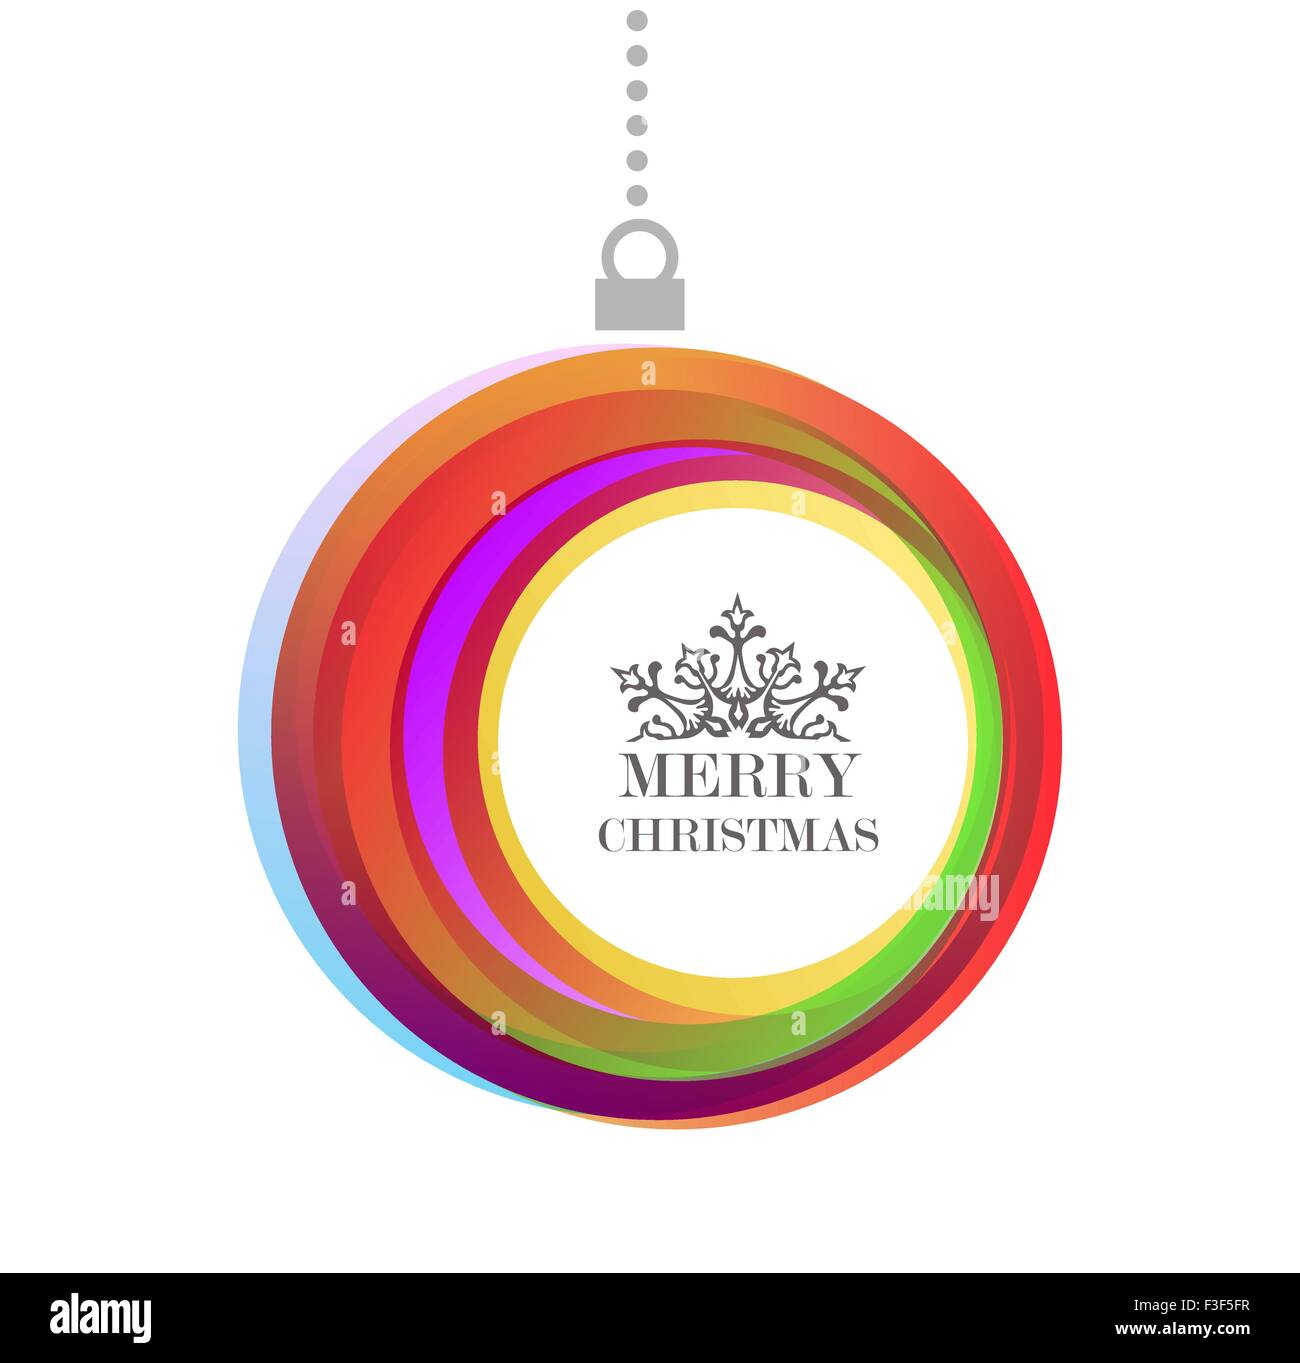 Merry christmas colorful bauble ornament with text, ideal for holiday greeting card background or invitation. EPS10 vector file. Stock Vector